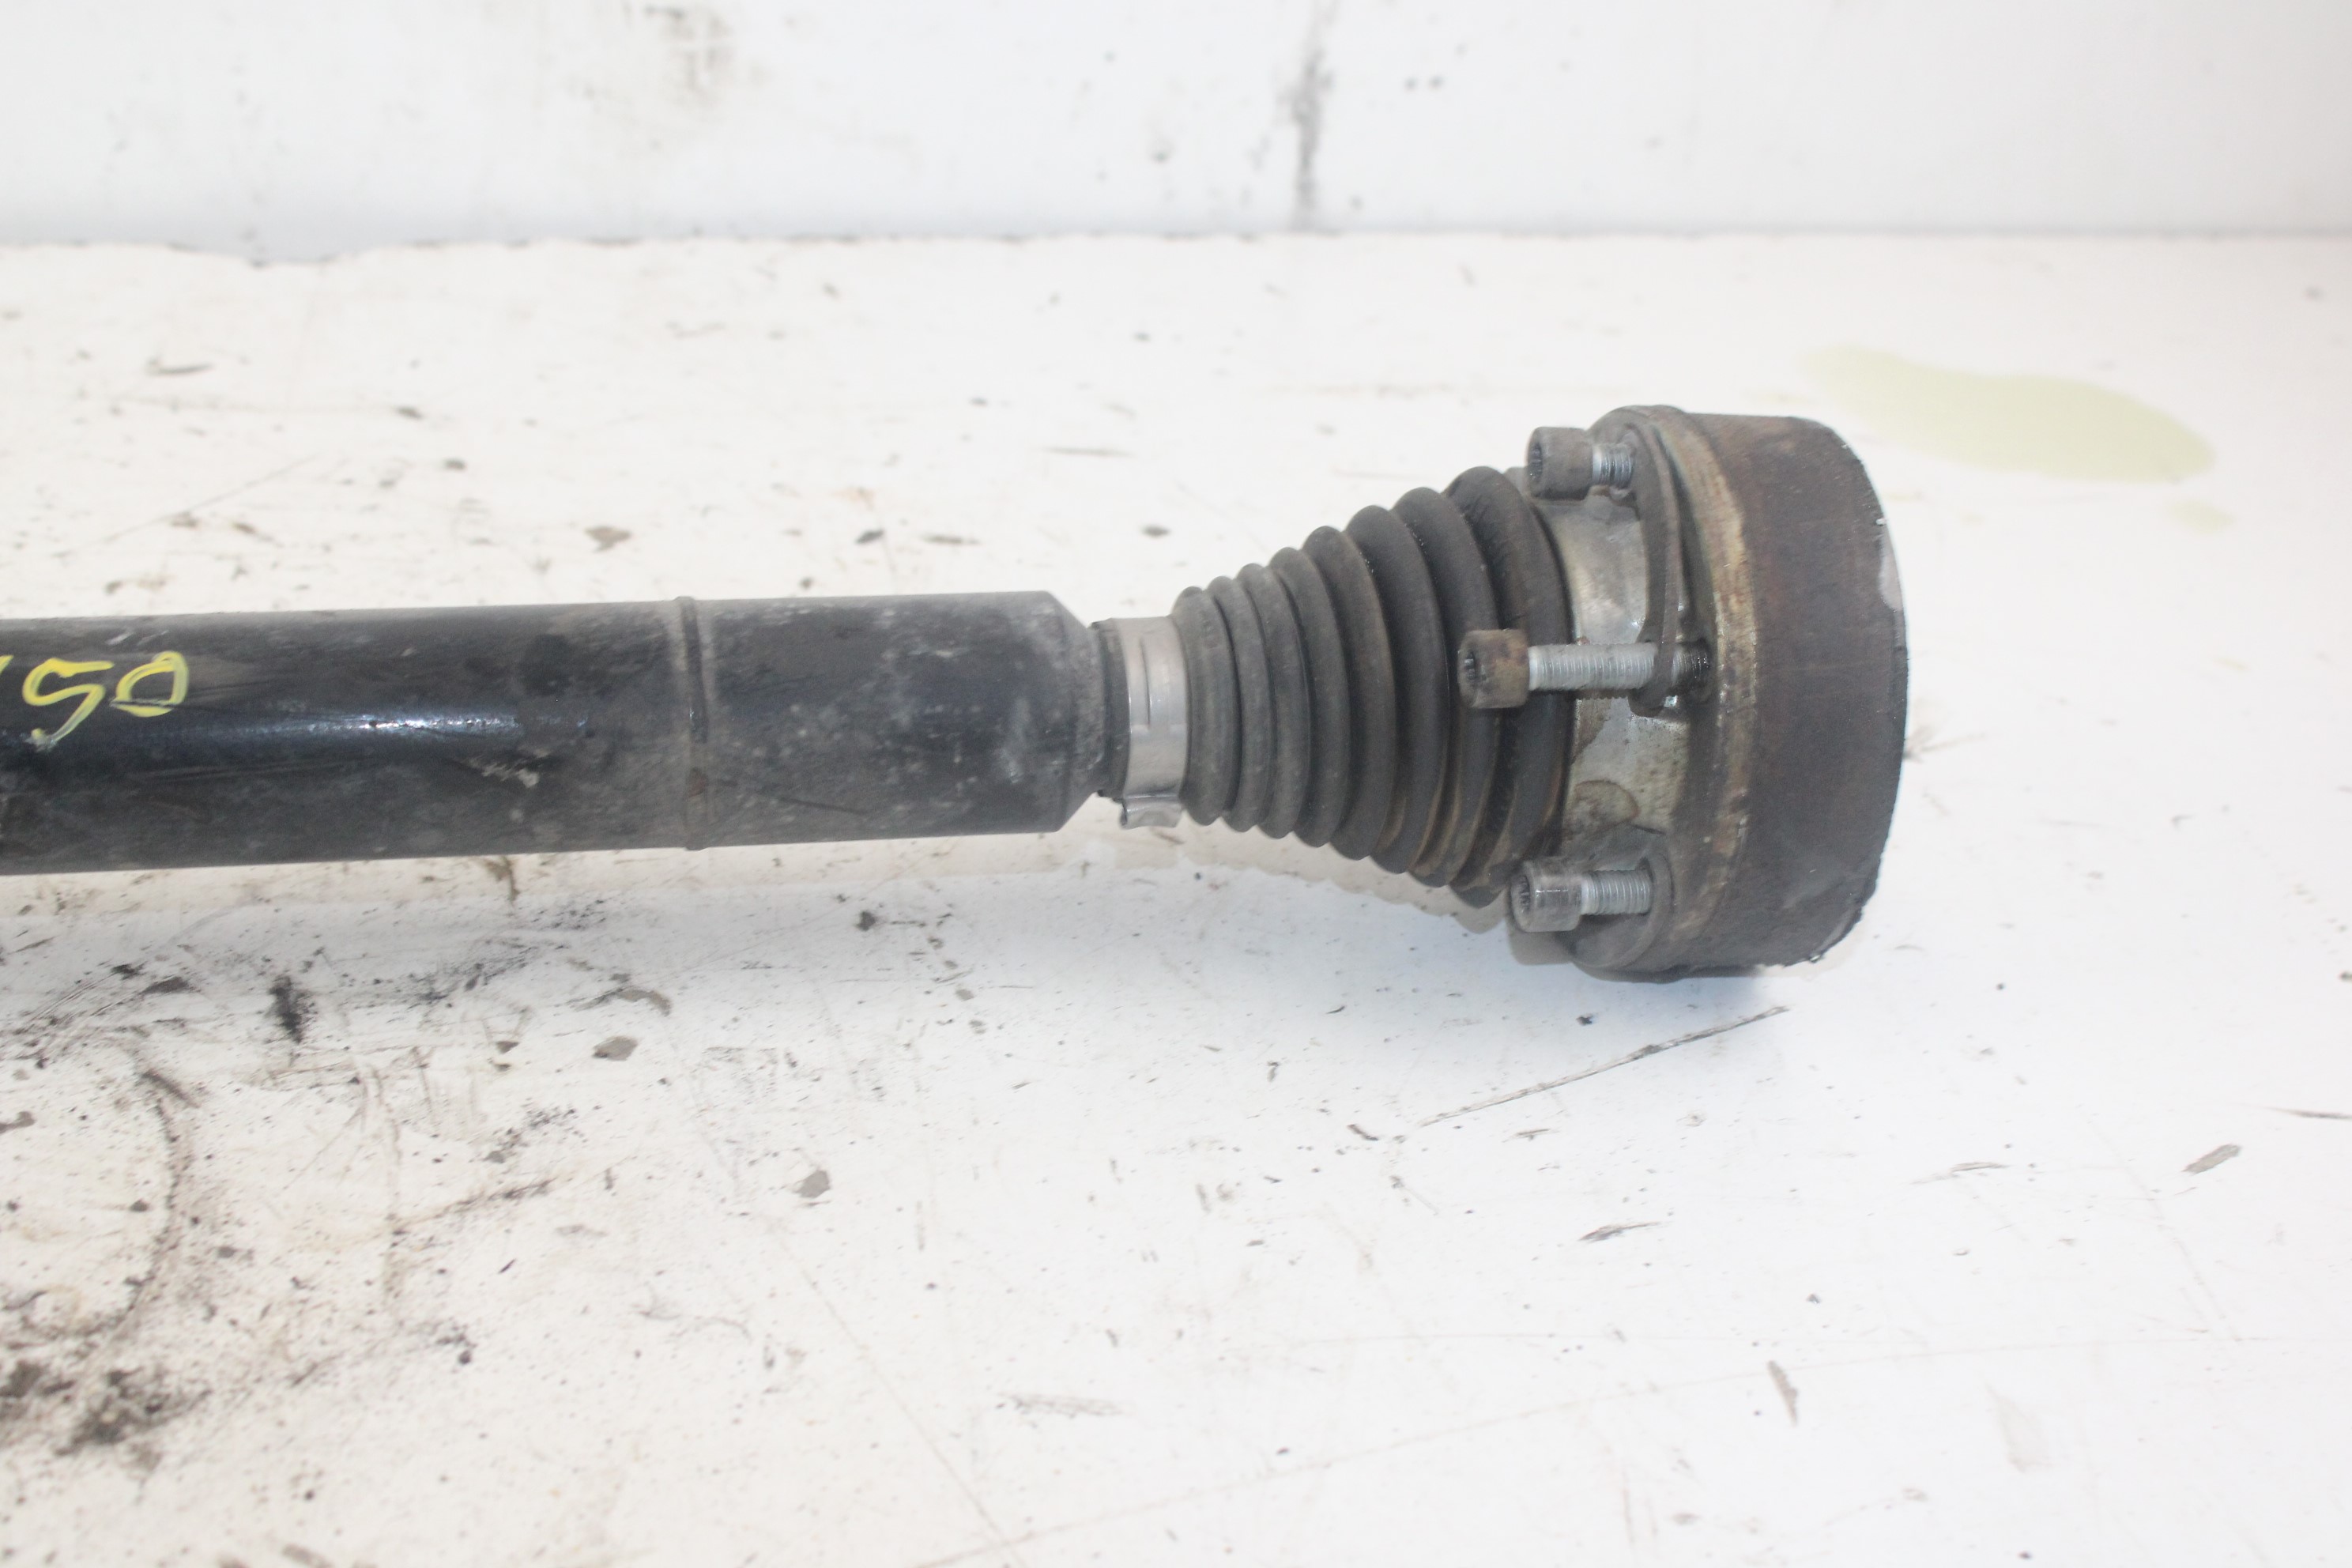 AUDI A1 8X (2010-2020) Front Right Driveshaft 6R0407762A 25187211